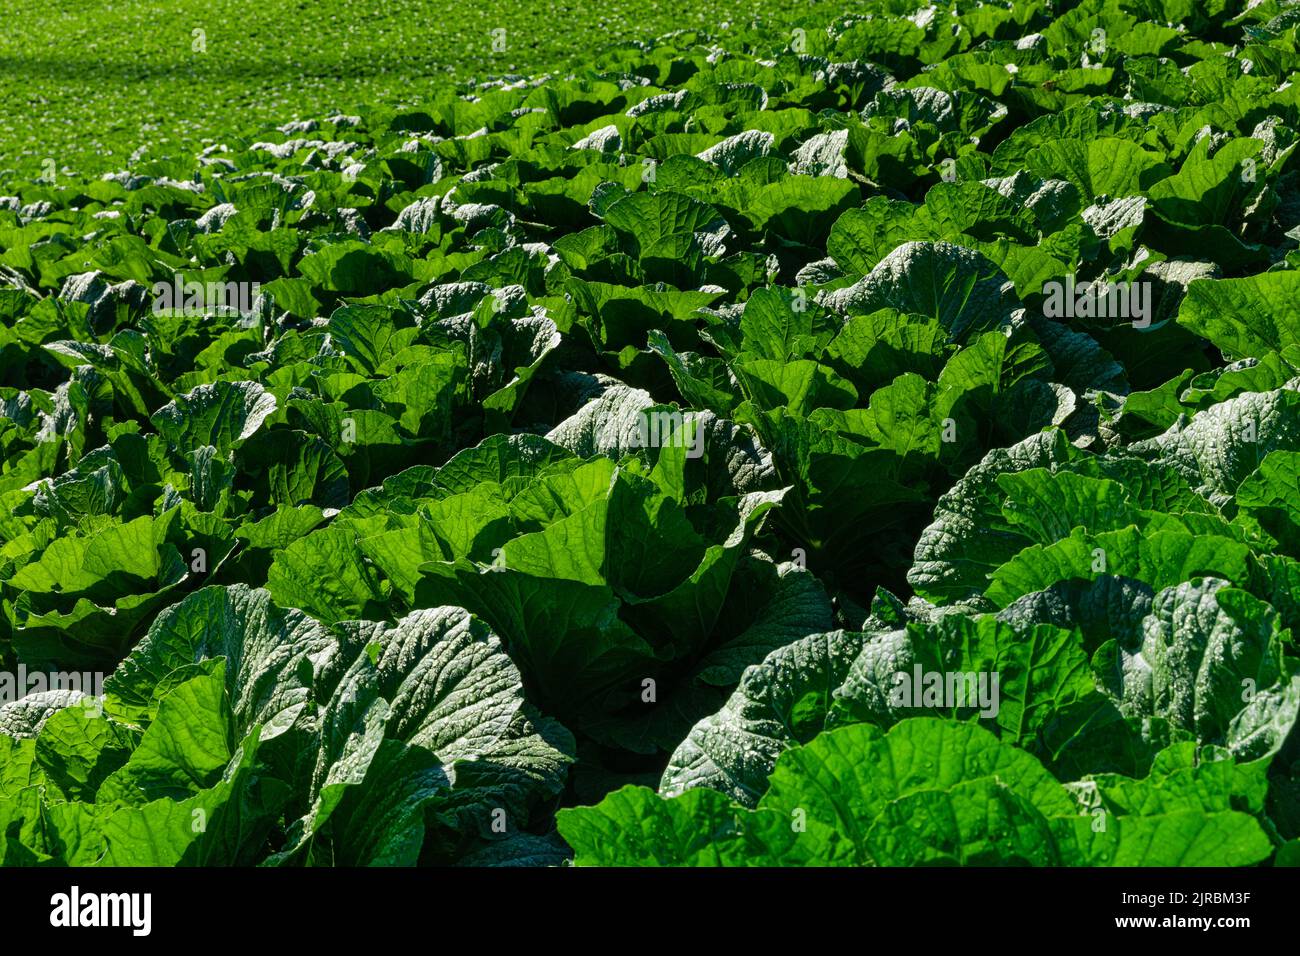 Close-up cabbage of green vegetables growing in alpine regions. Taebaek-si, Gangwon-do, South Korea. Stock Photo